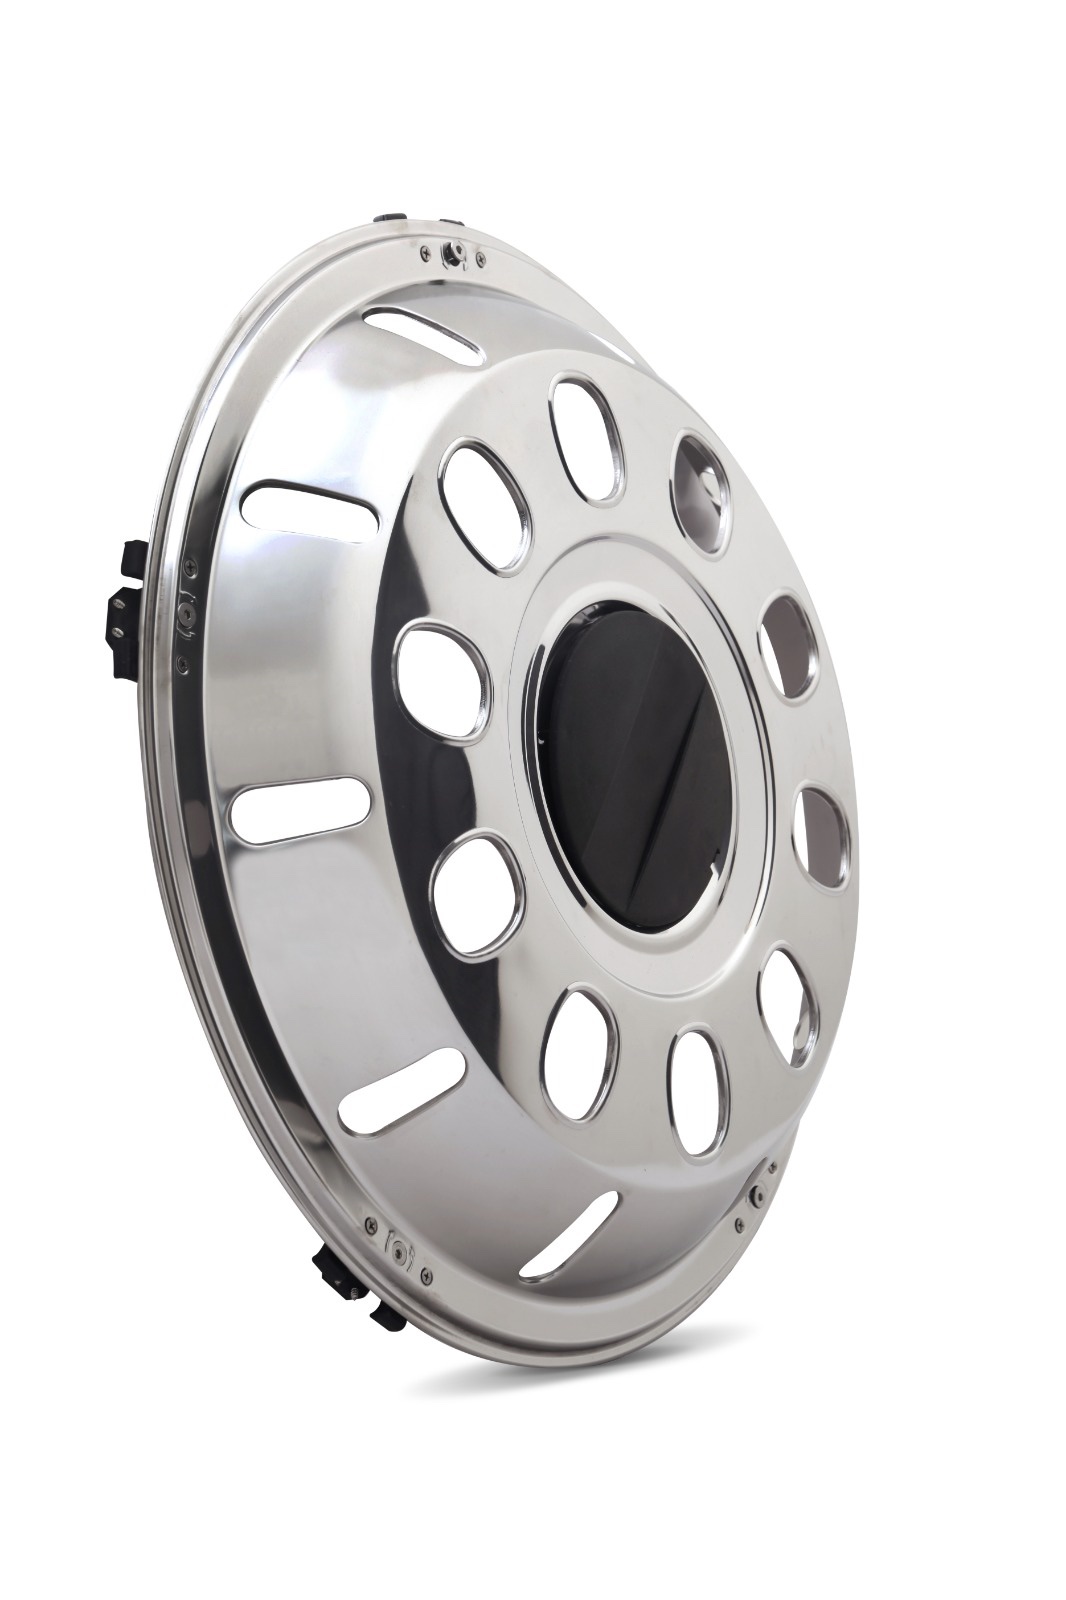 22,5 Stainless Steel Wheel Covers front ,Code: C2203 F